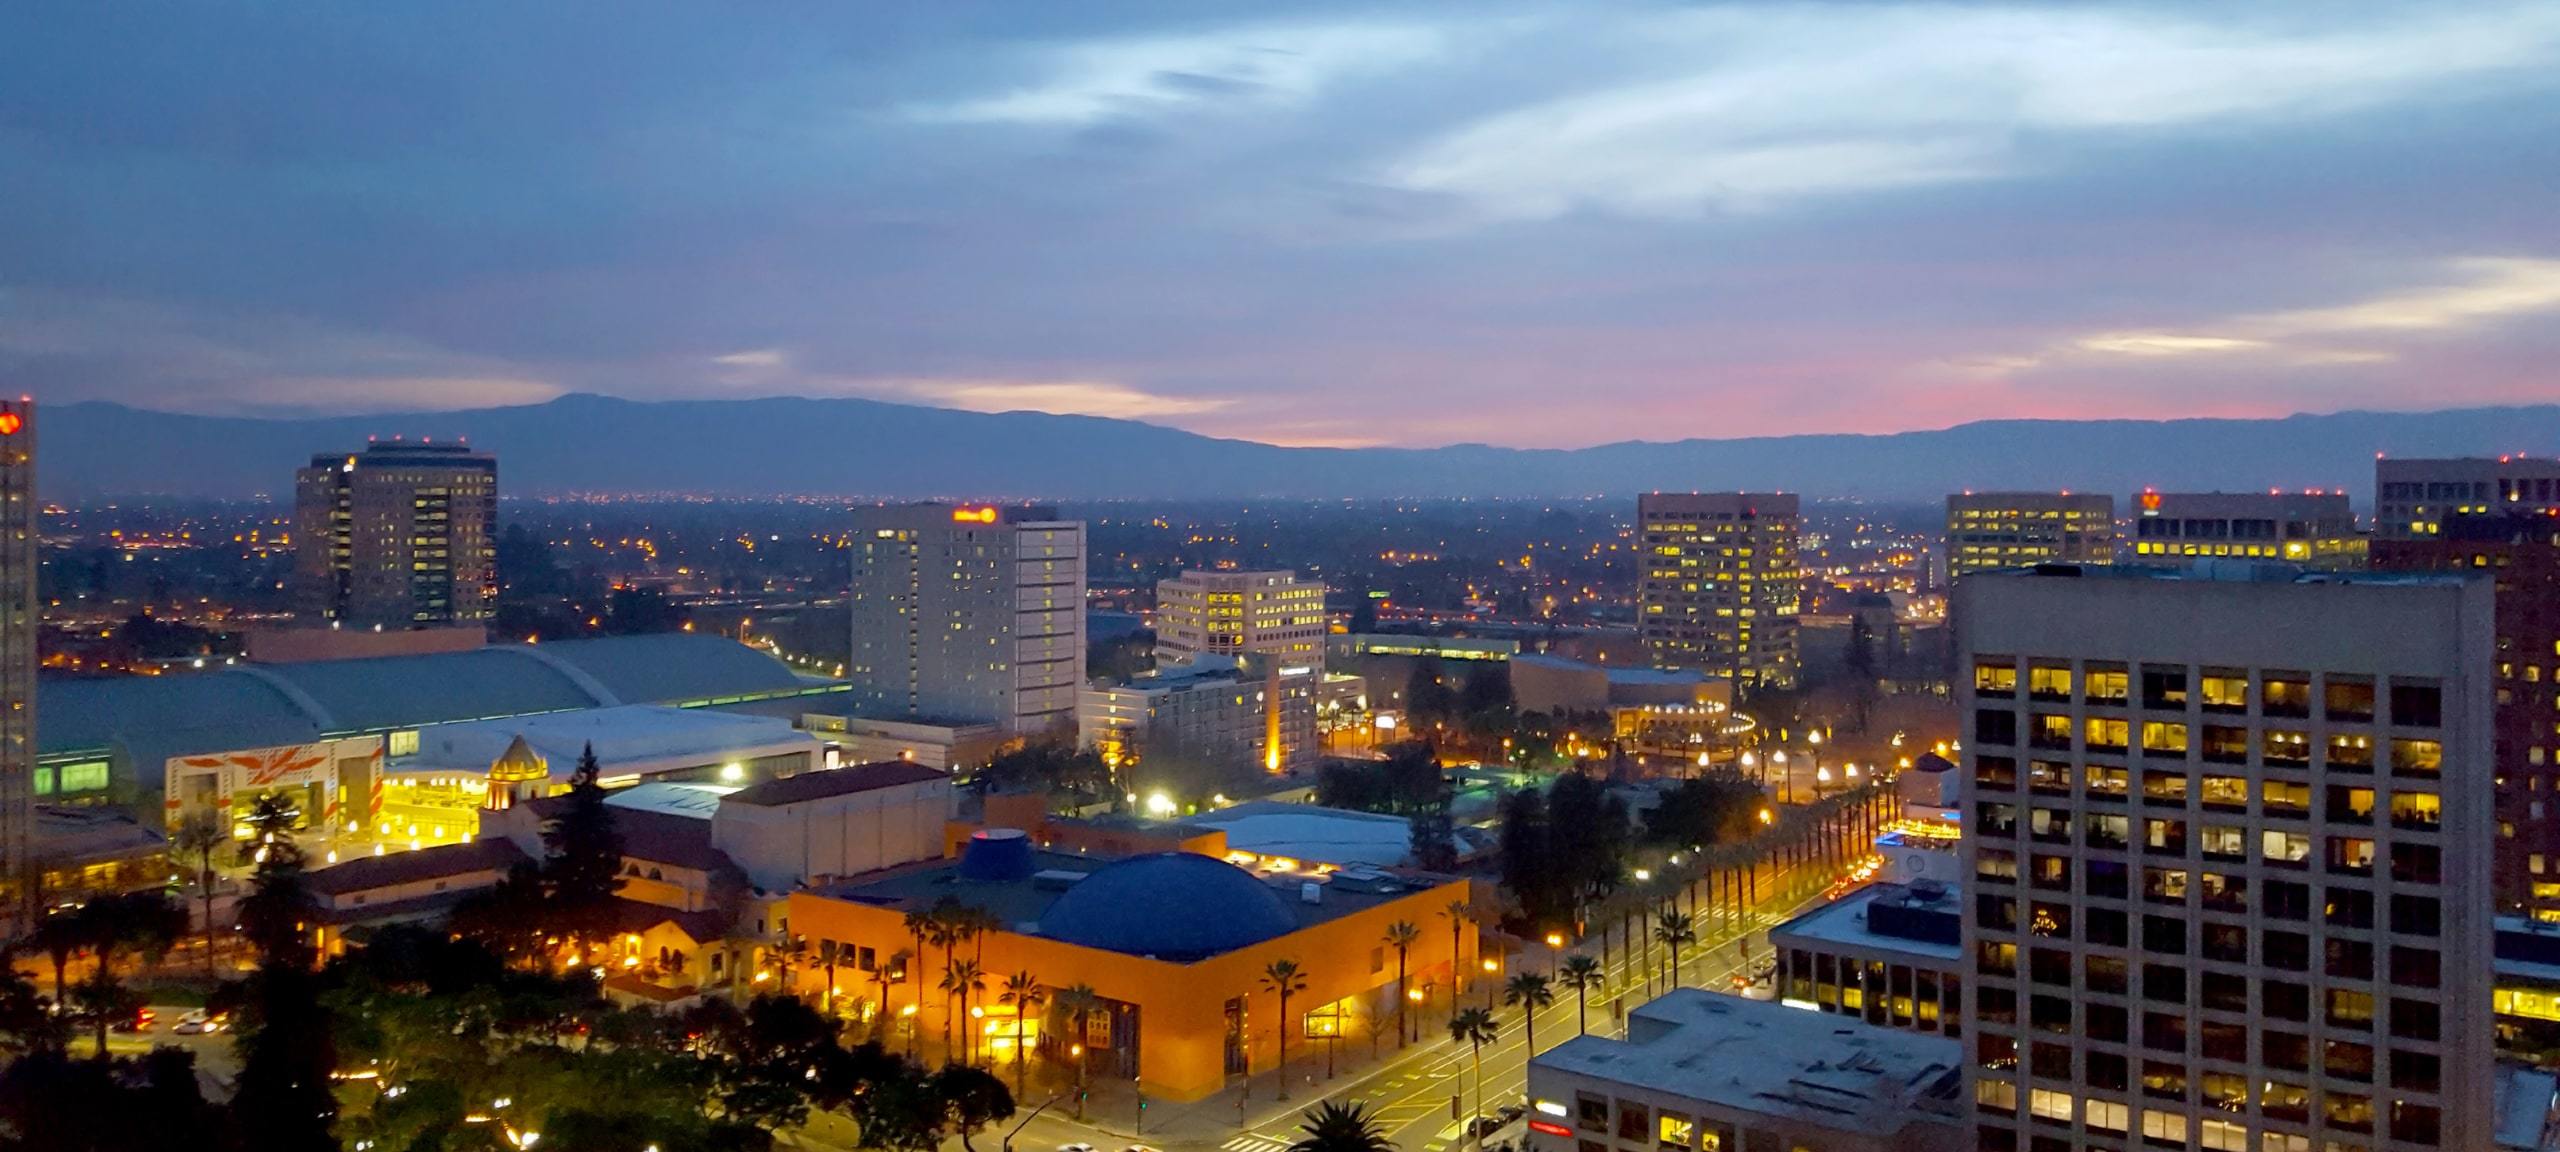 Aerial view over San Jose, California downtown during sunset